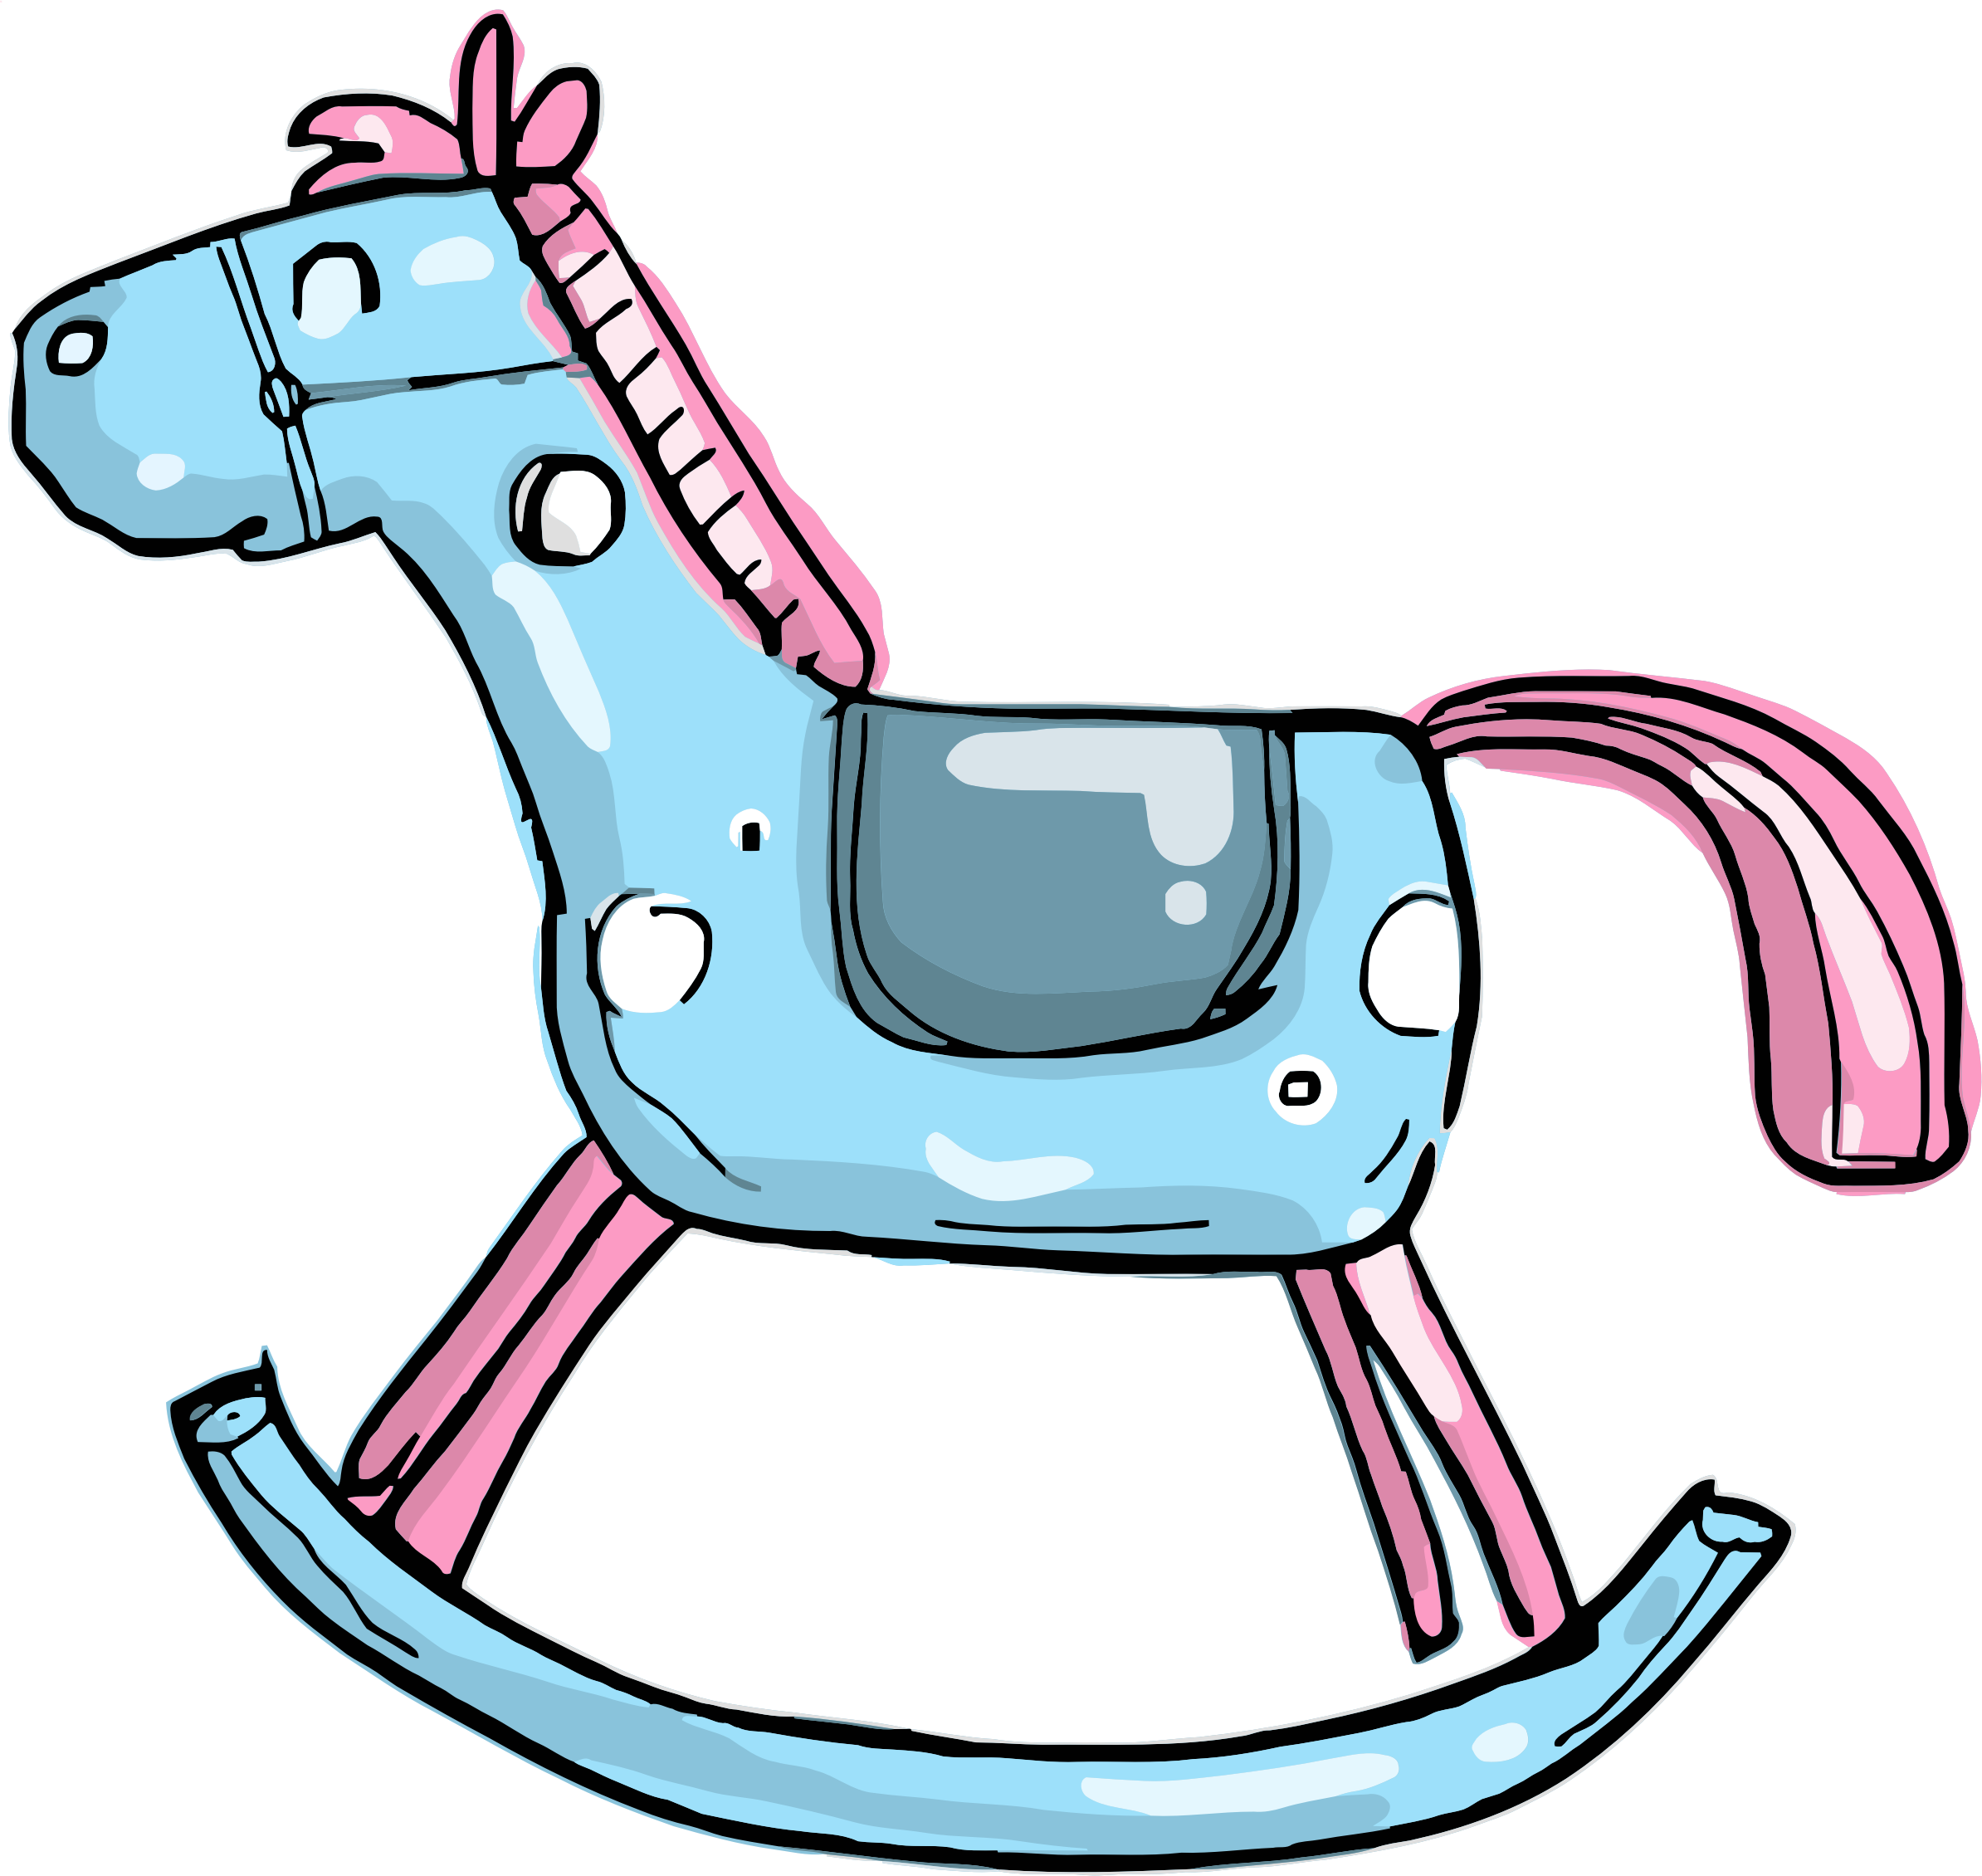 This Png File Is About Children , Infant , Play , Horse - This Png File Is About Children , Infant , Play , Horse (2388x2260)